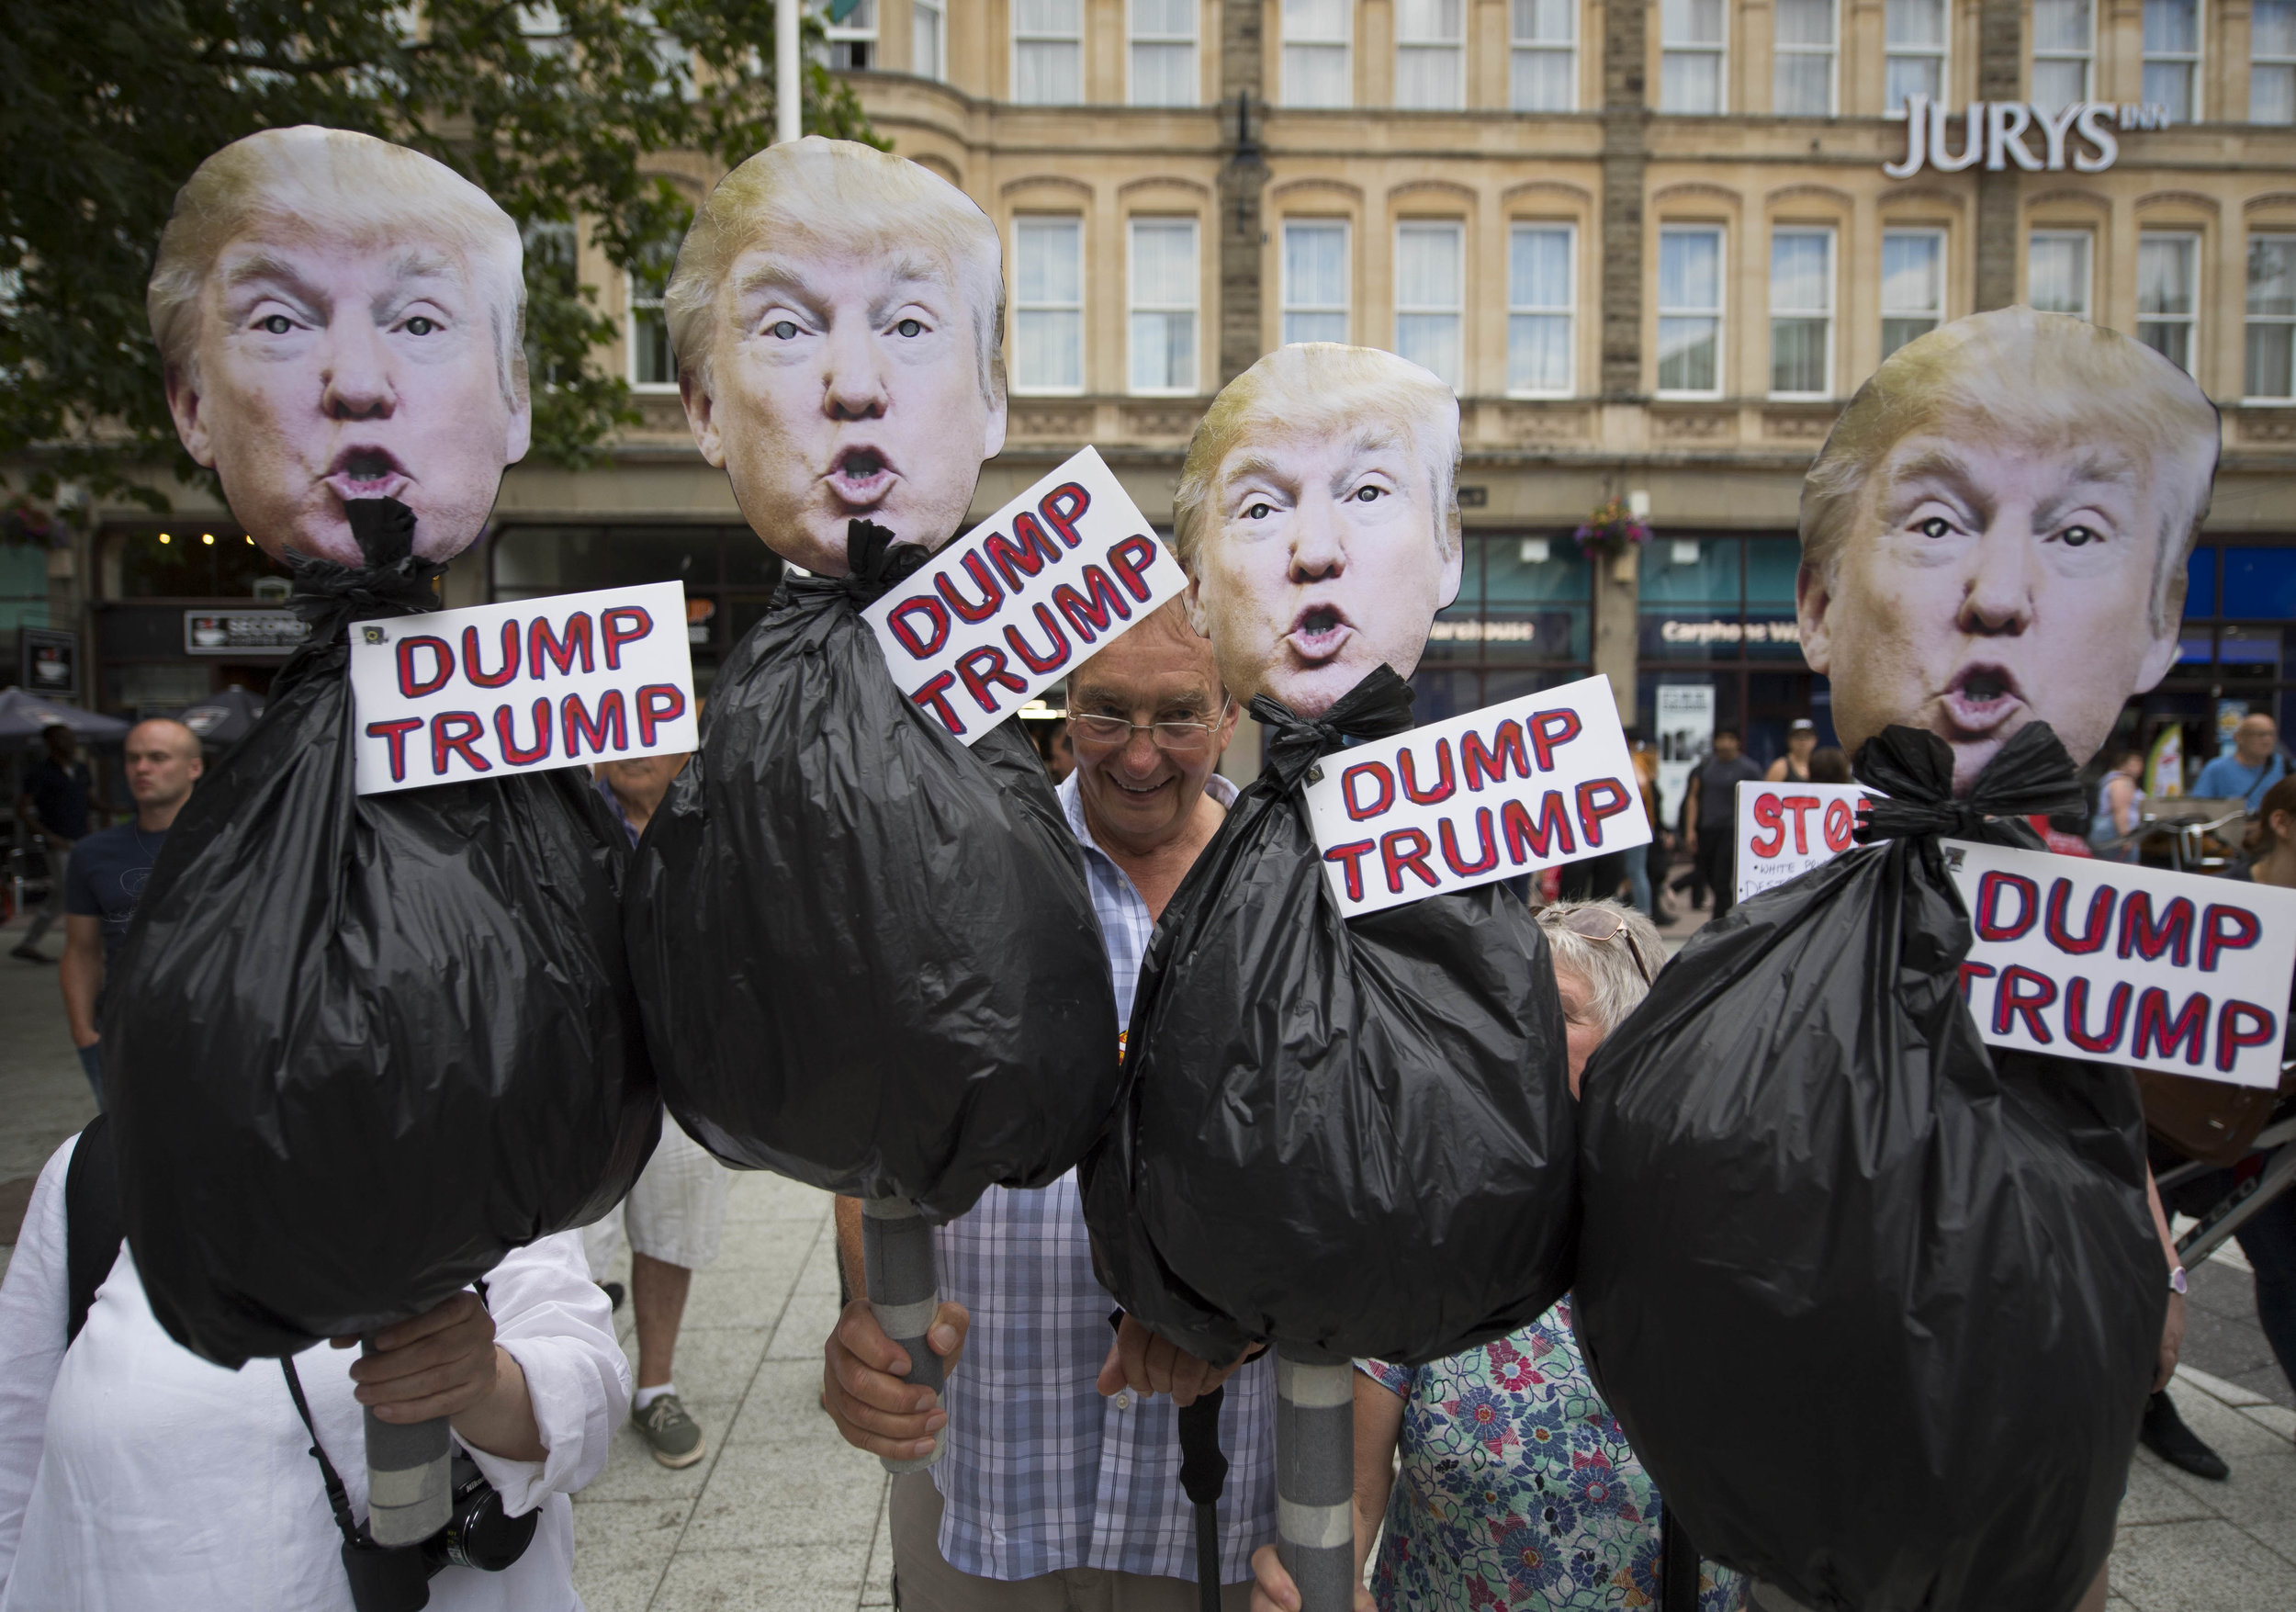  CARDIFF, UNITED KINGDOM - JULY 12: Protestors hold anti Donald Trump signs during a protest on Queen Street against a visit by the President of the United States Donald Trump on July 12, 2018 in Cardiff, United Kingdom. The President of the United S